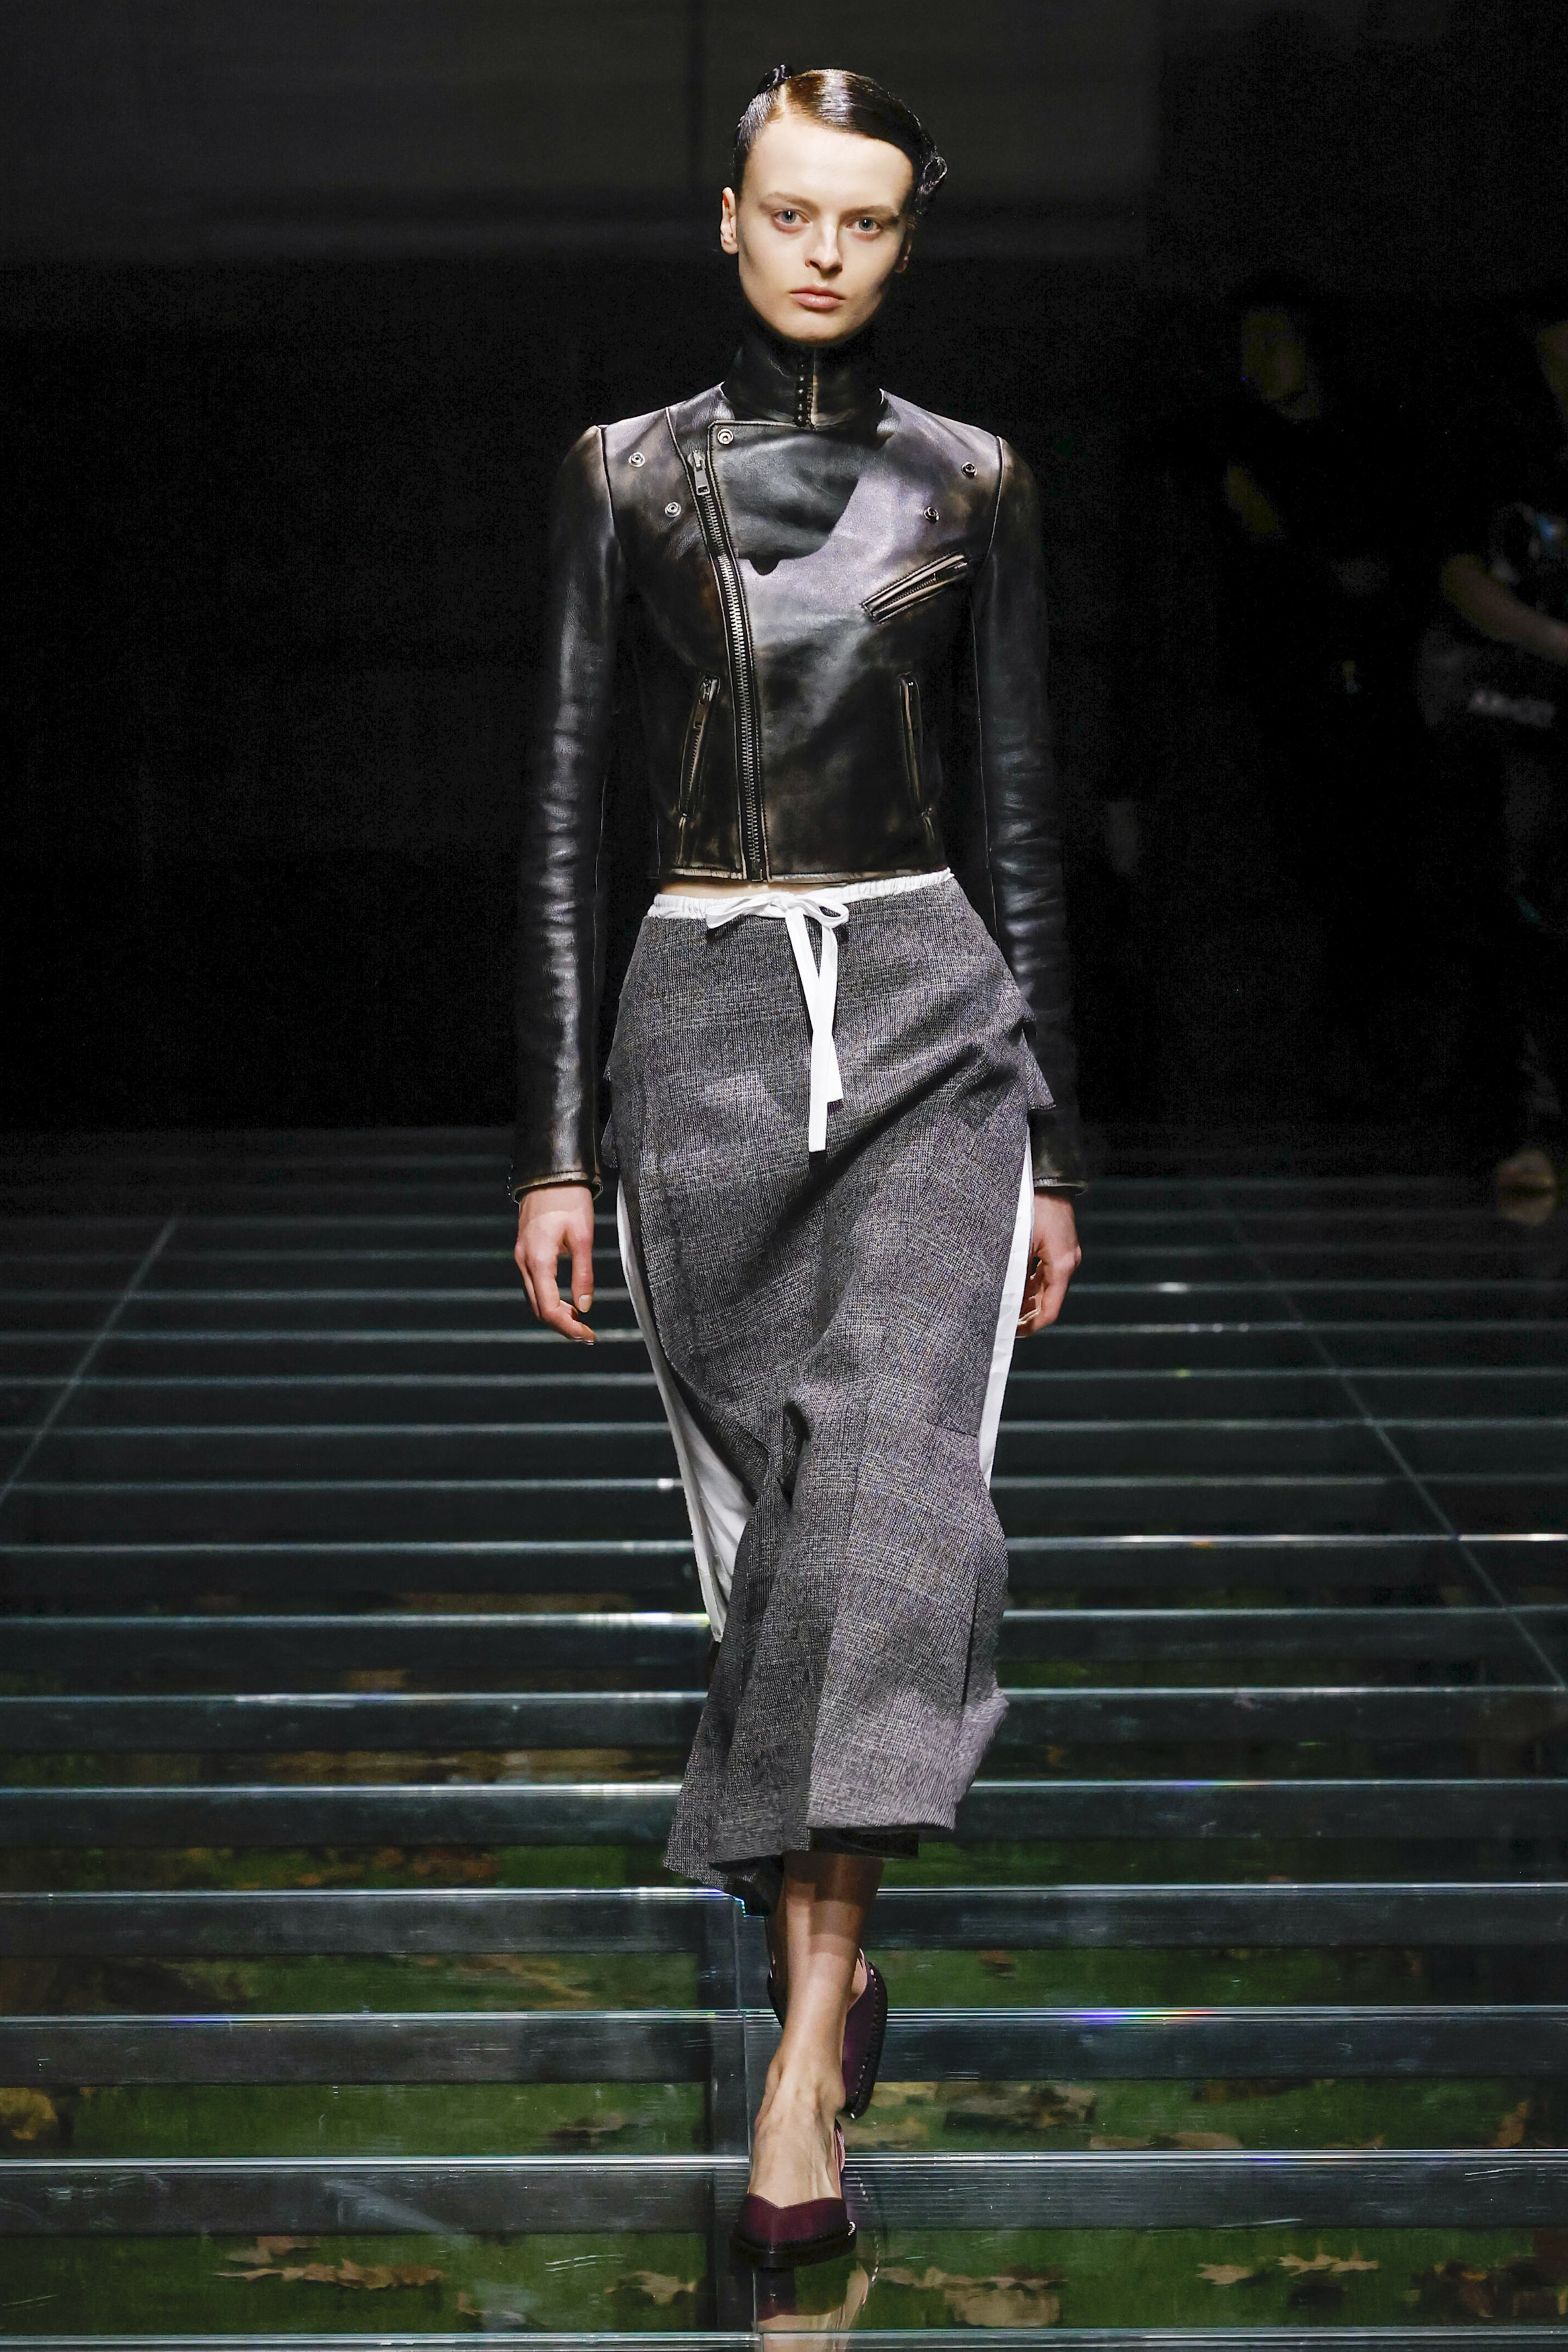 A Prada model wearing a high-neck leather jacket with a gray skirt at the FW24 show.